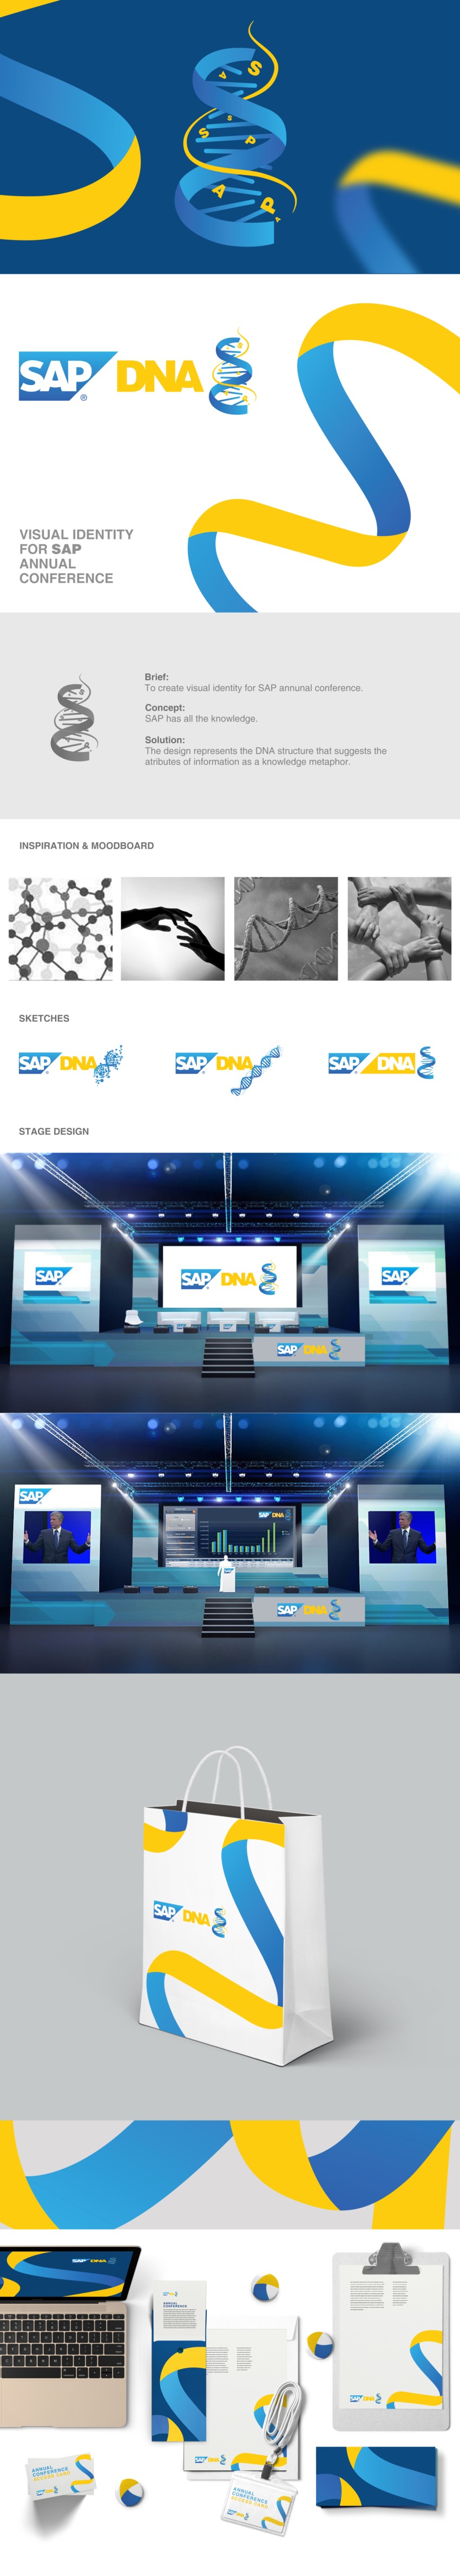 SAP HAS ALL THE KNOWLEDGE - sap conference presentation 2.jpg